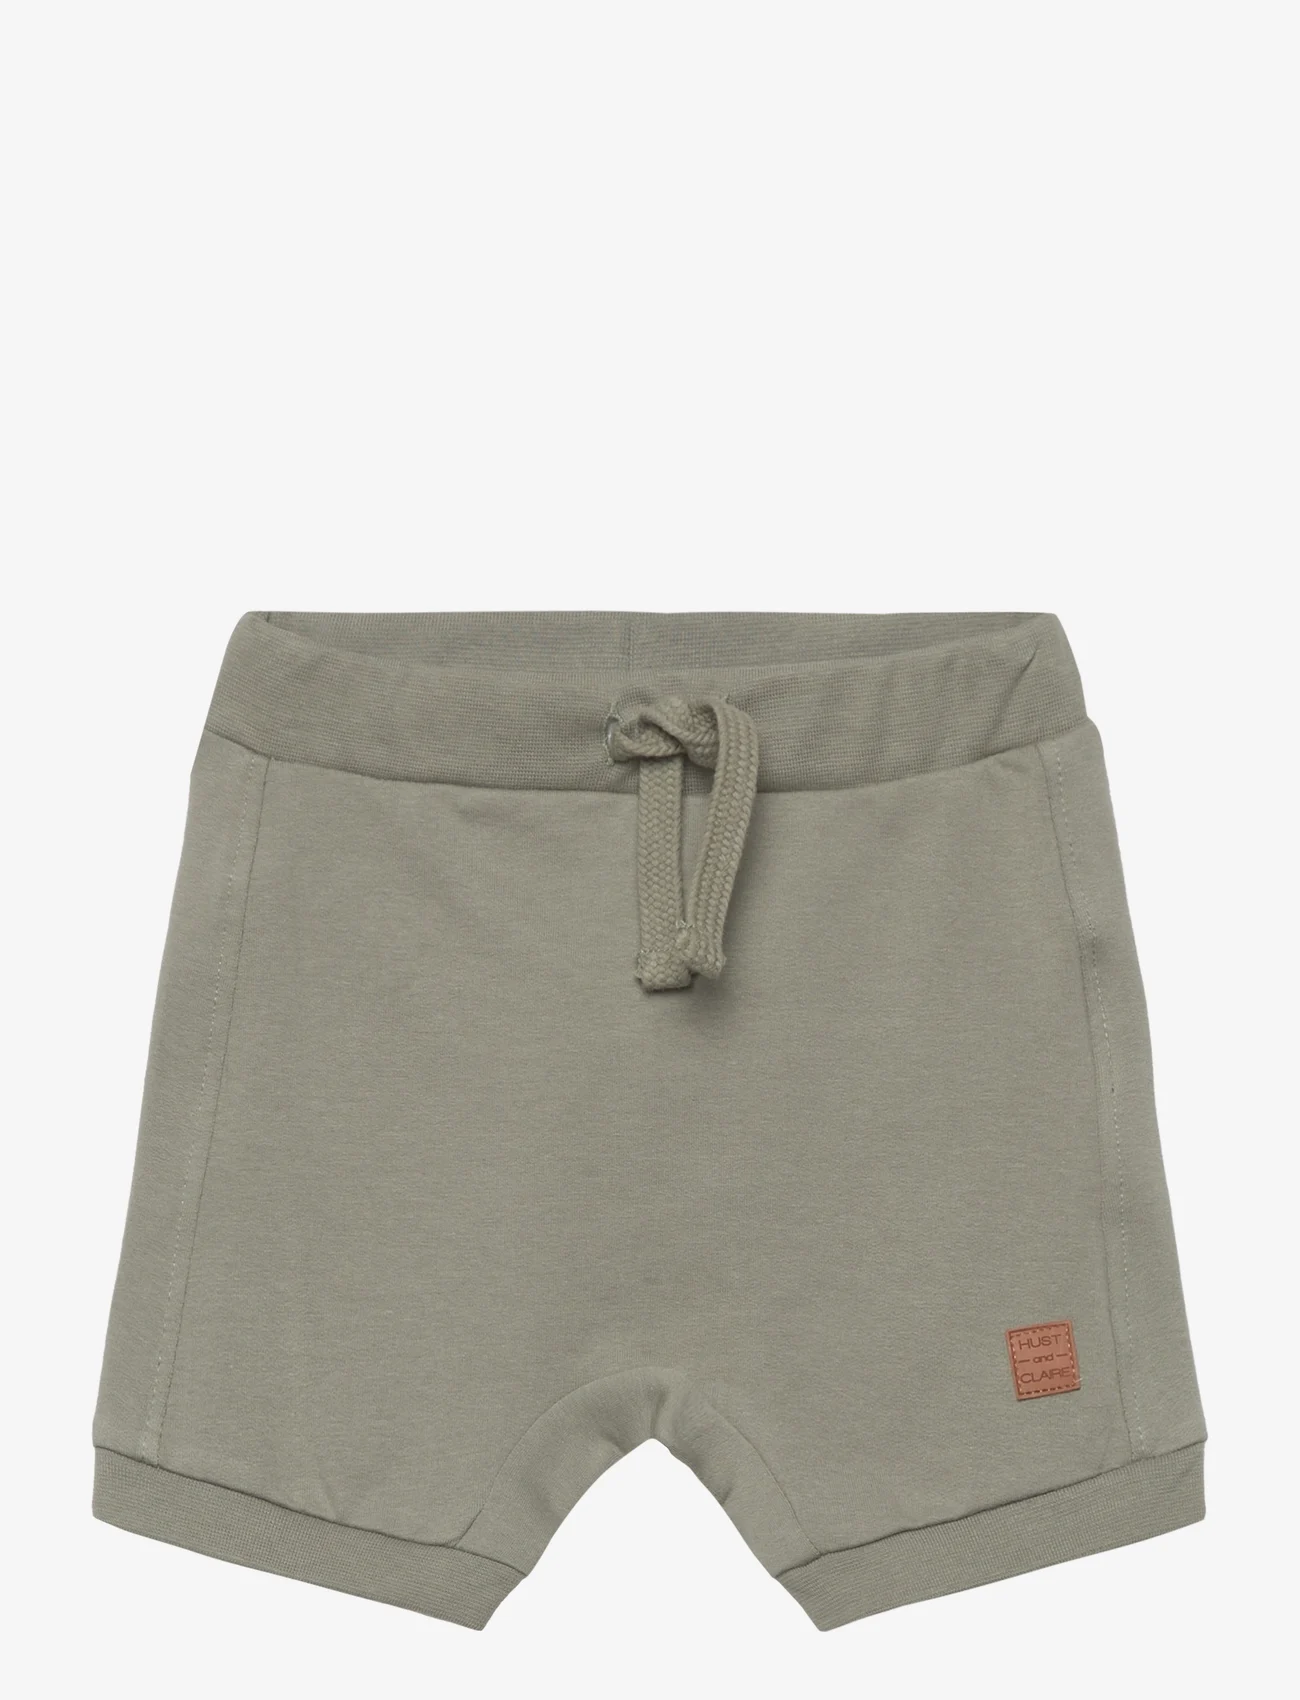 Hust & Claire - Hubert - sweat shorts - seagrass - 0